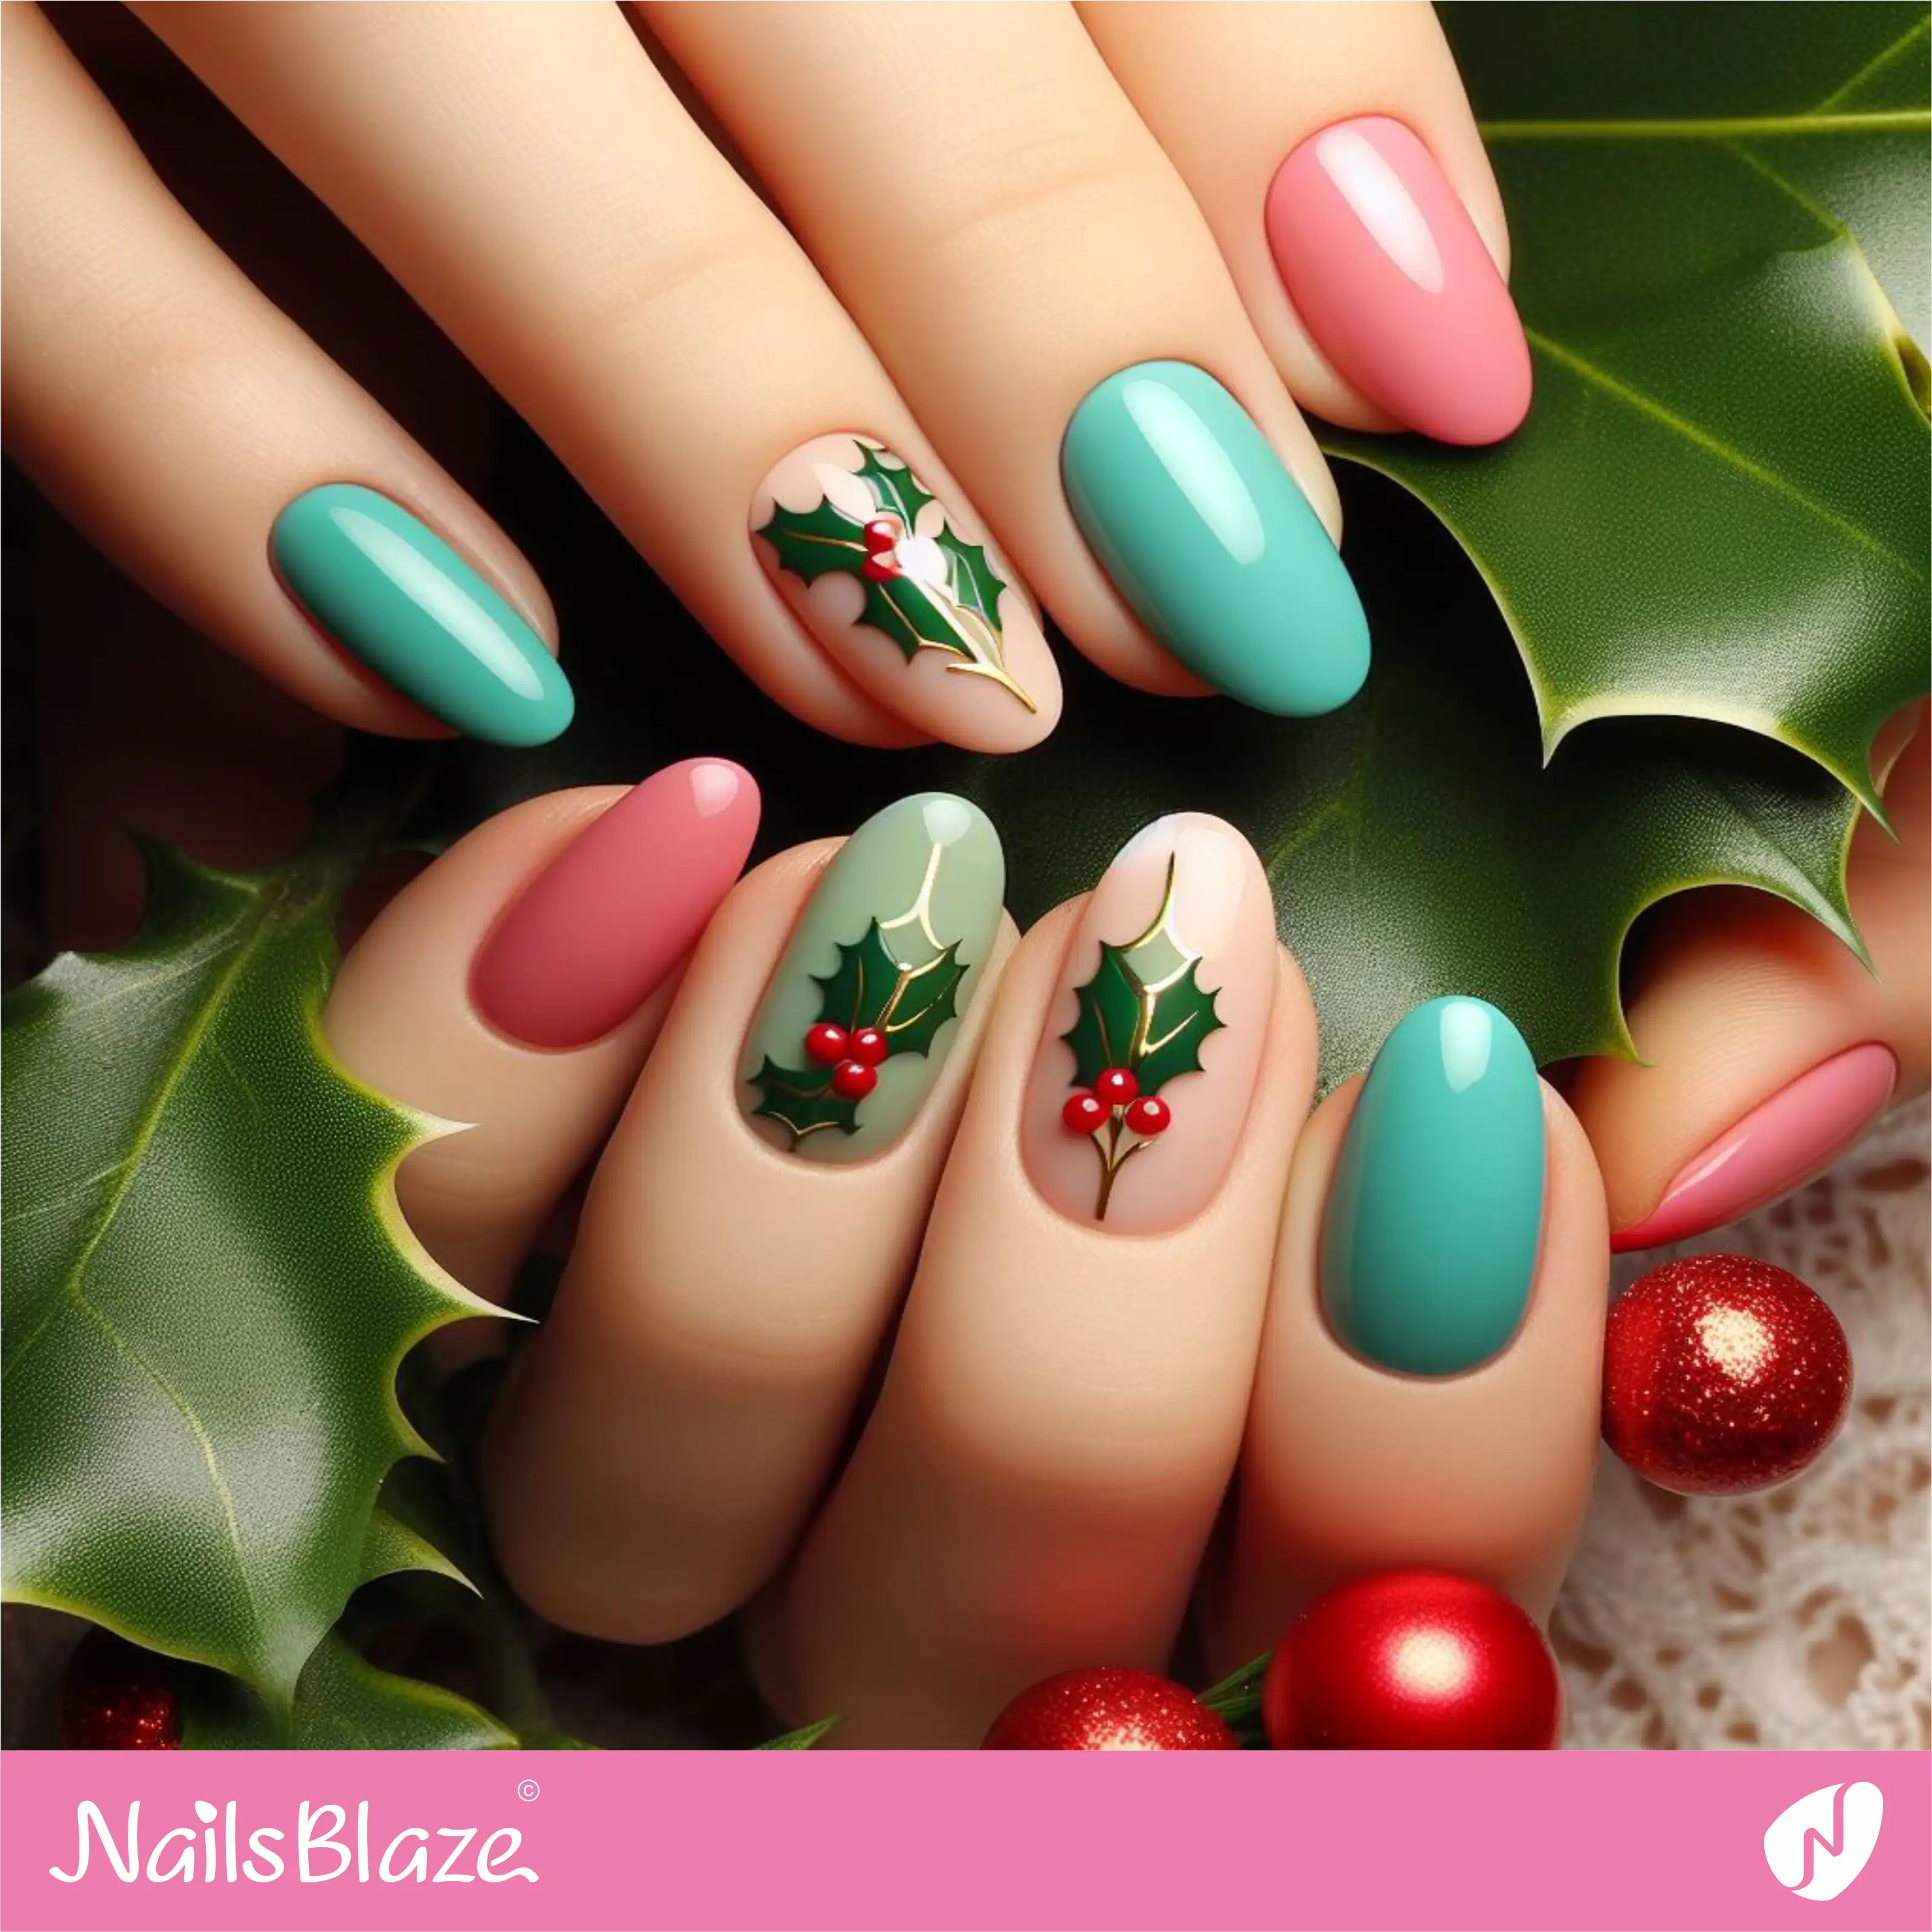 Colorful Nails with Holly Leaves | Nature-inspired Nails - NB1653